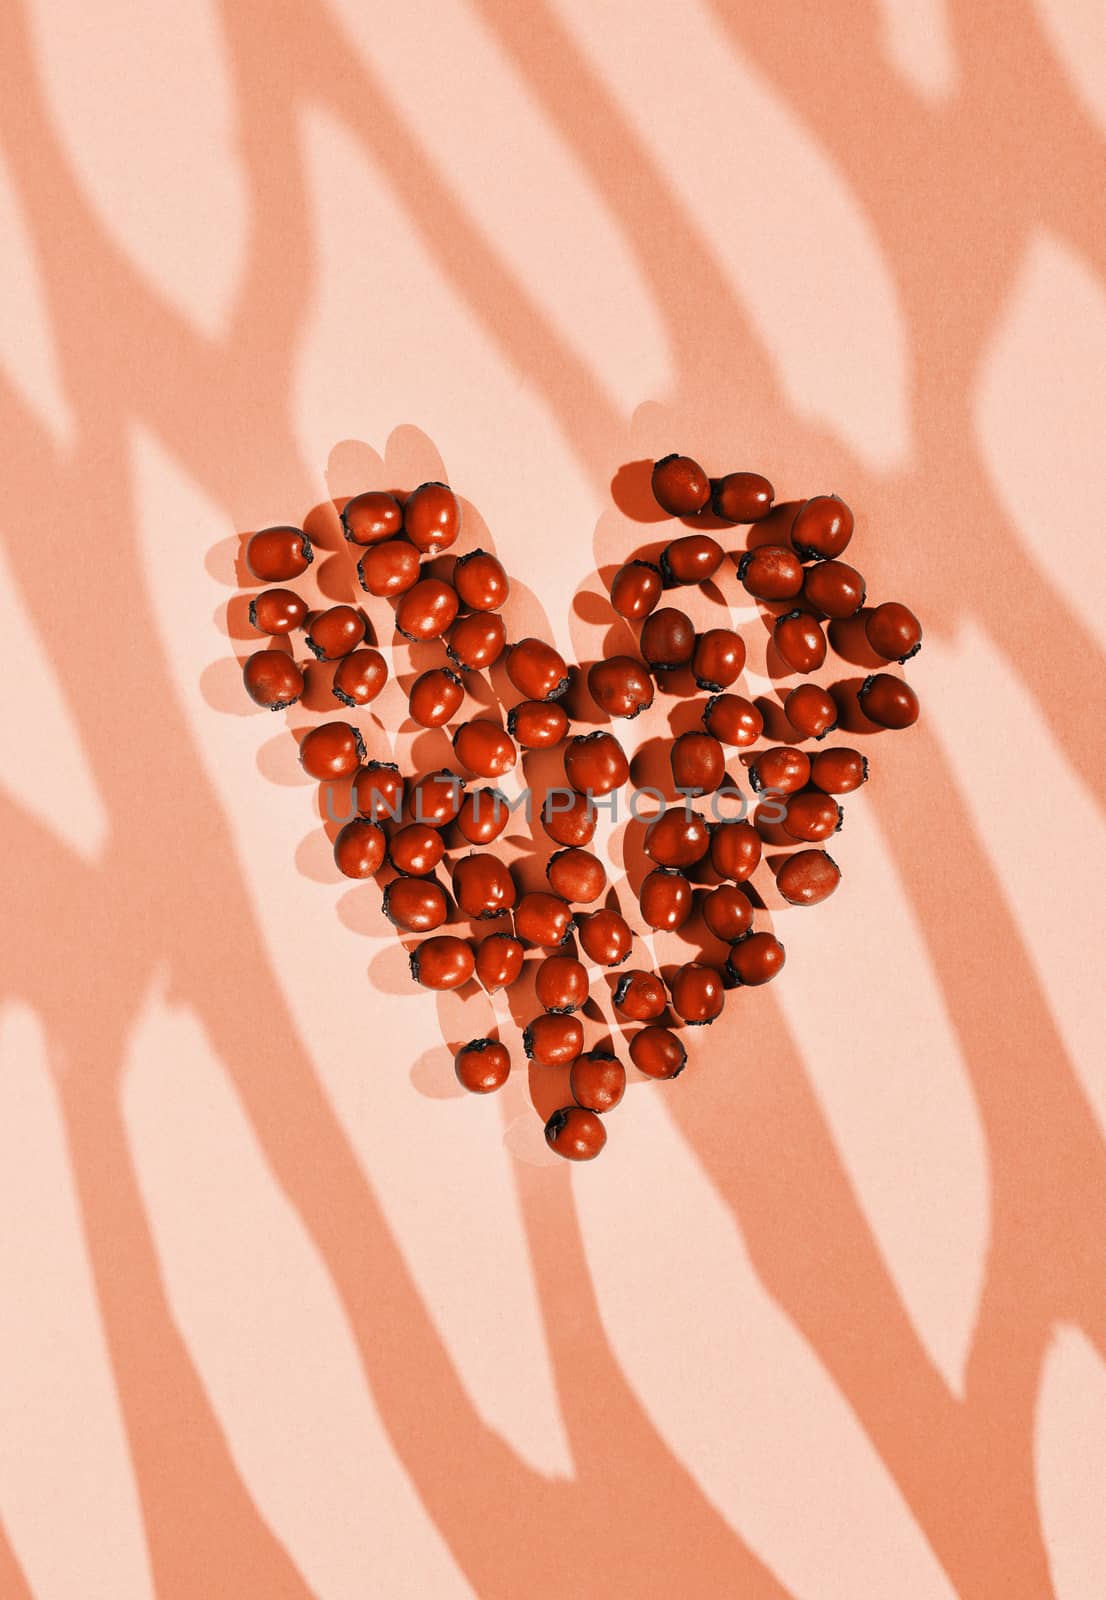 Overhead view of berries in heart shape , shadows on background , monochromatic coral